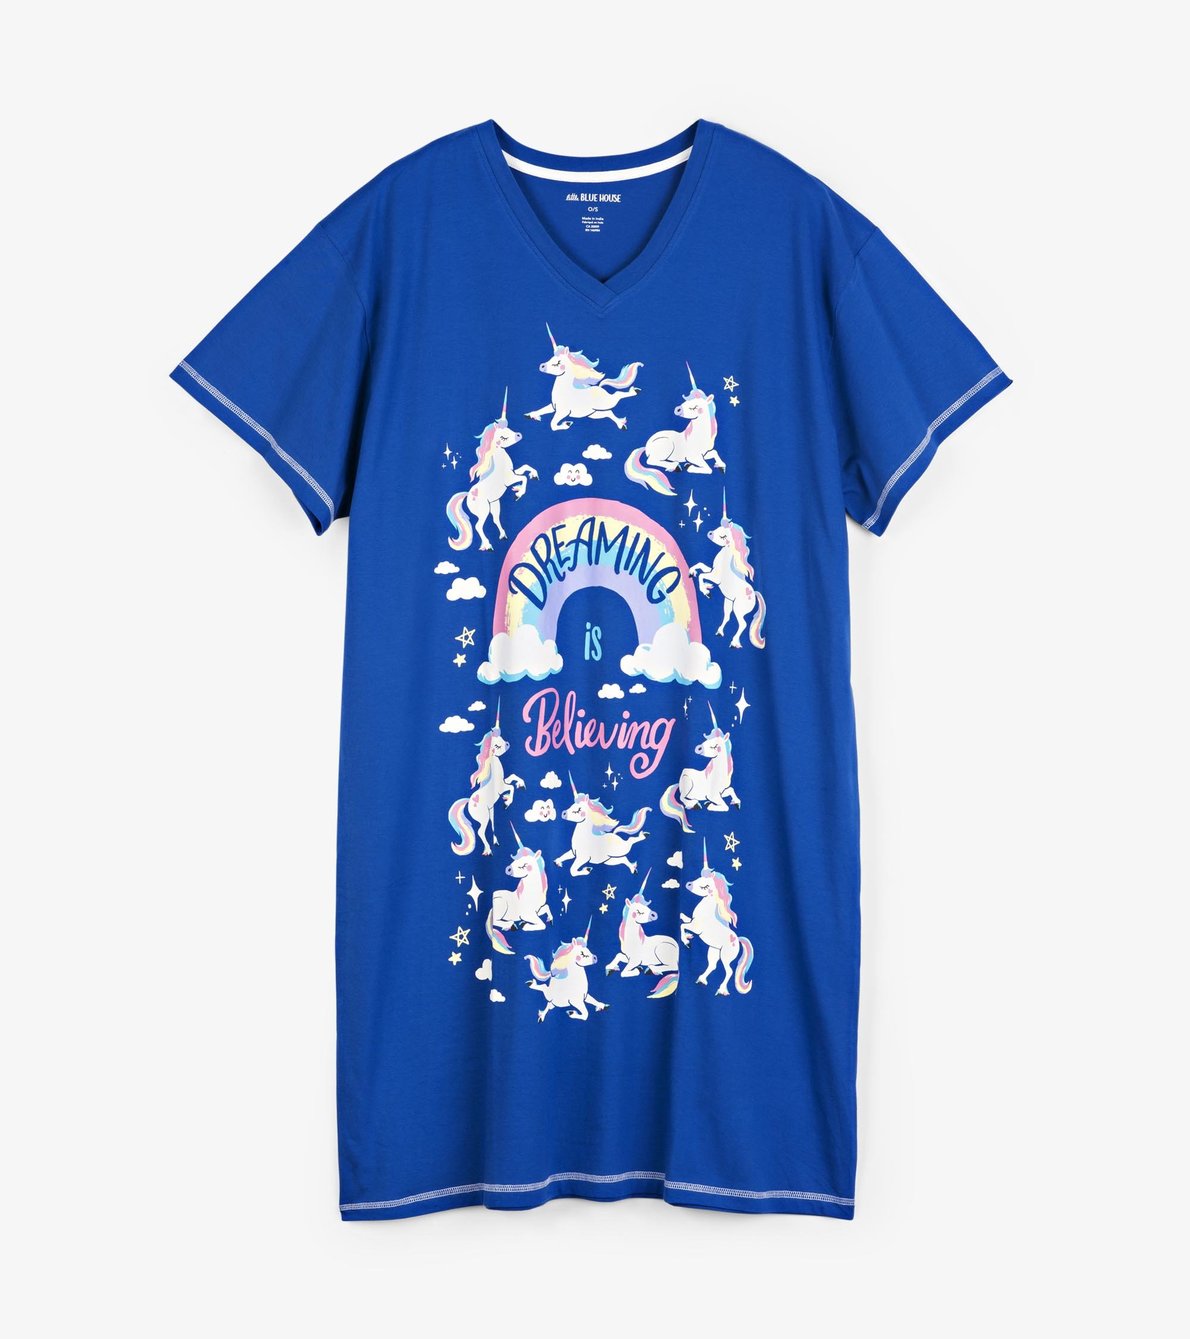 View larger image of Dreaming is Believing Women's Sleepshirt